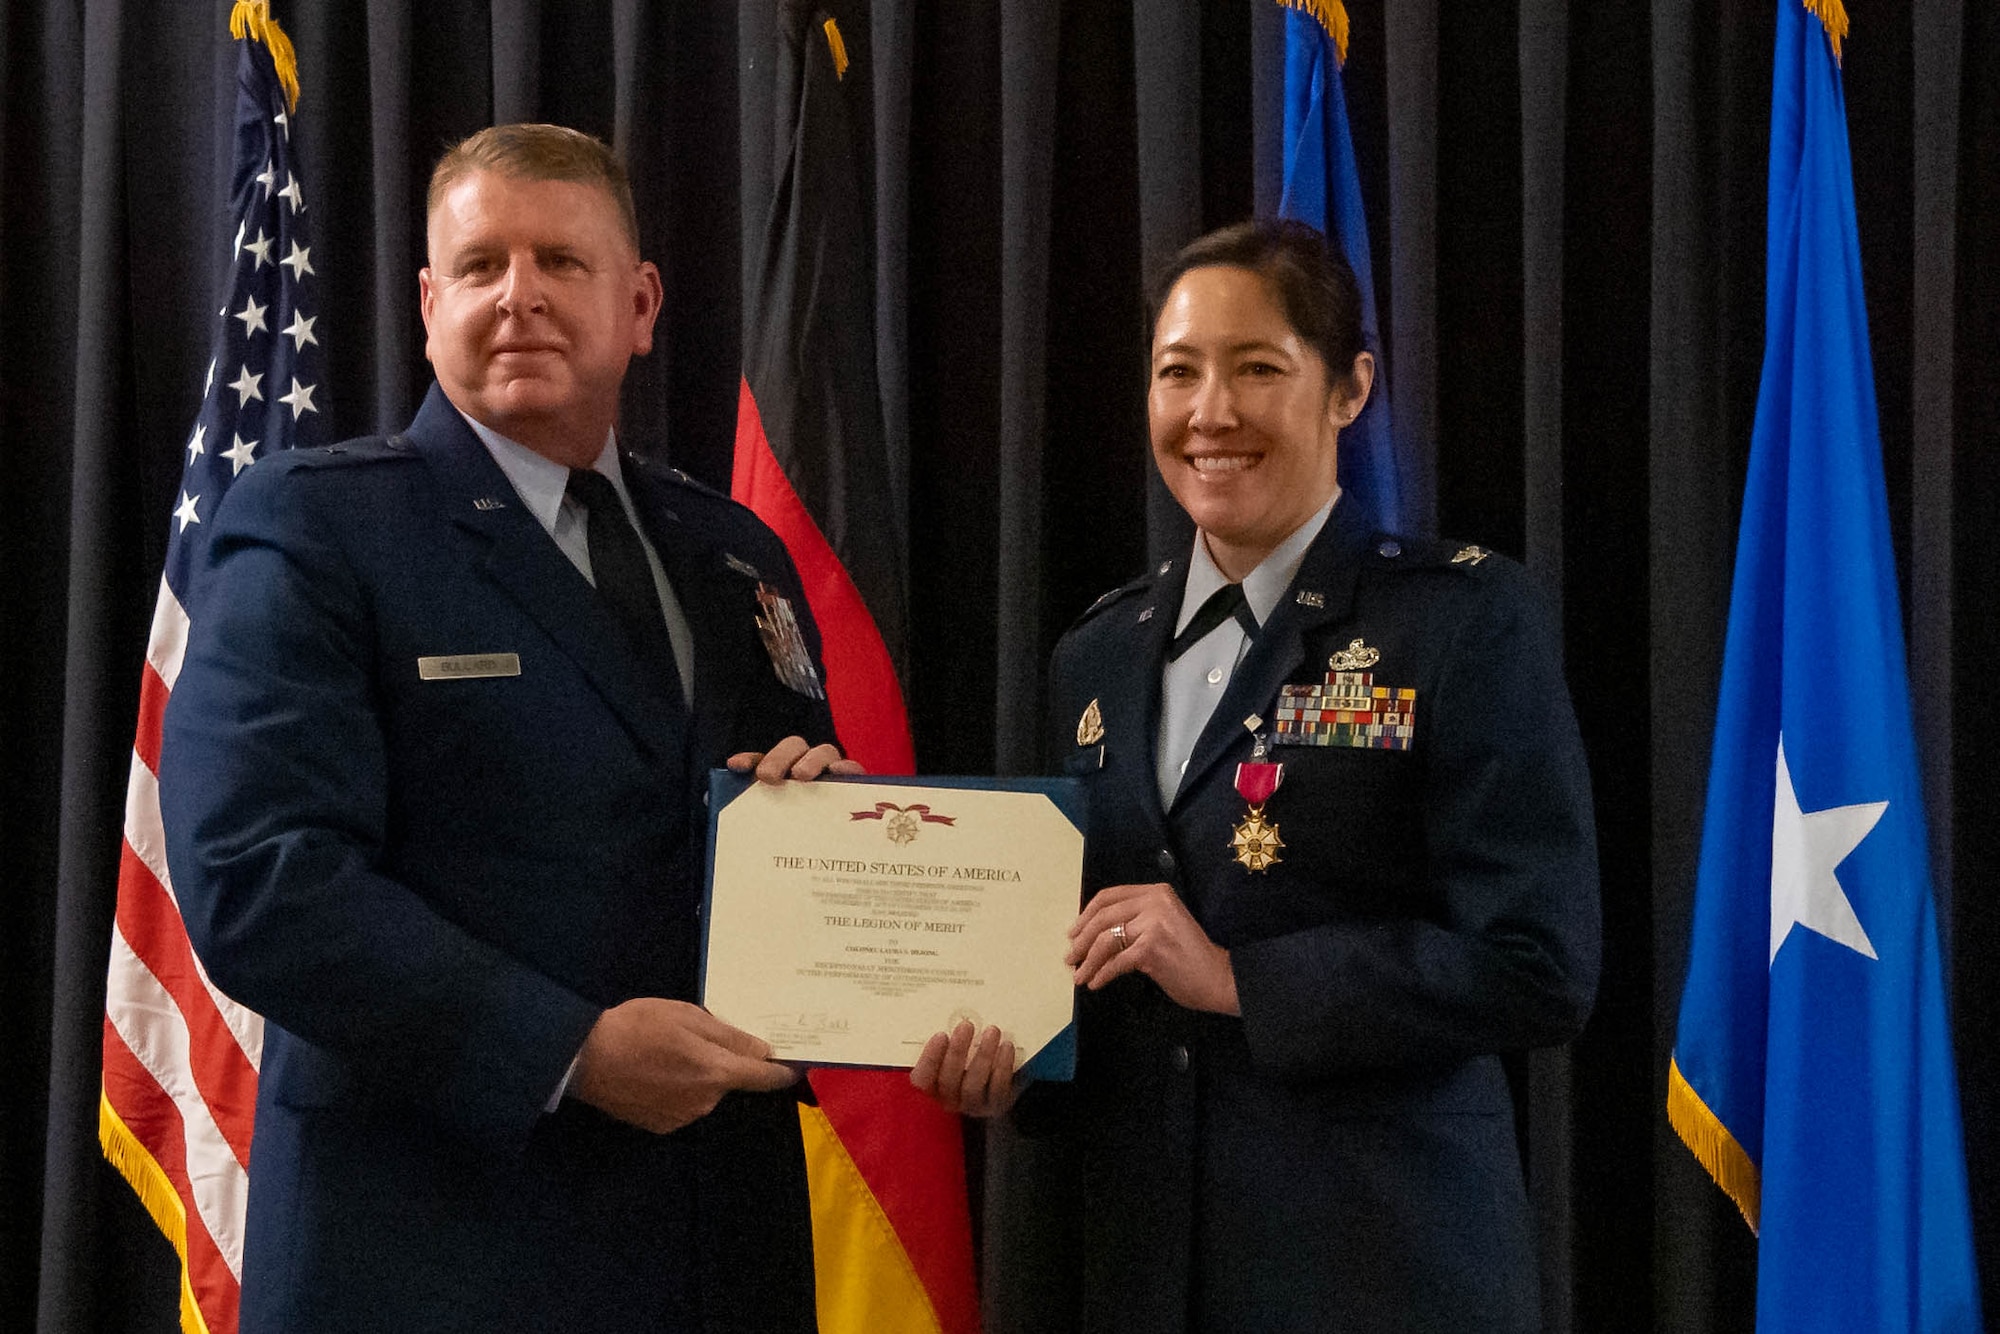 Airman is presented with certificate.